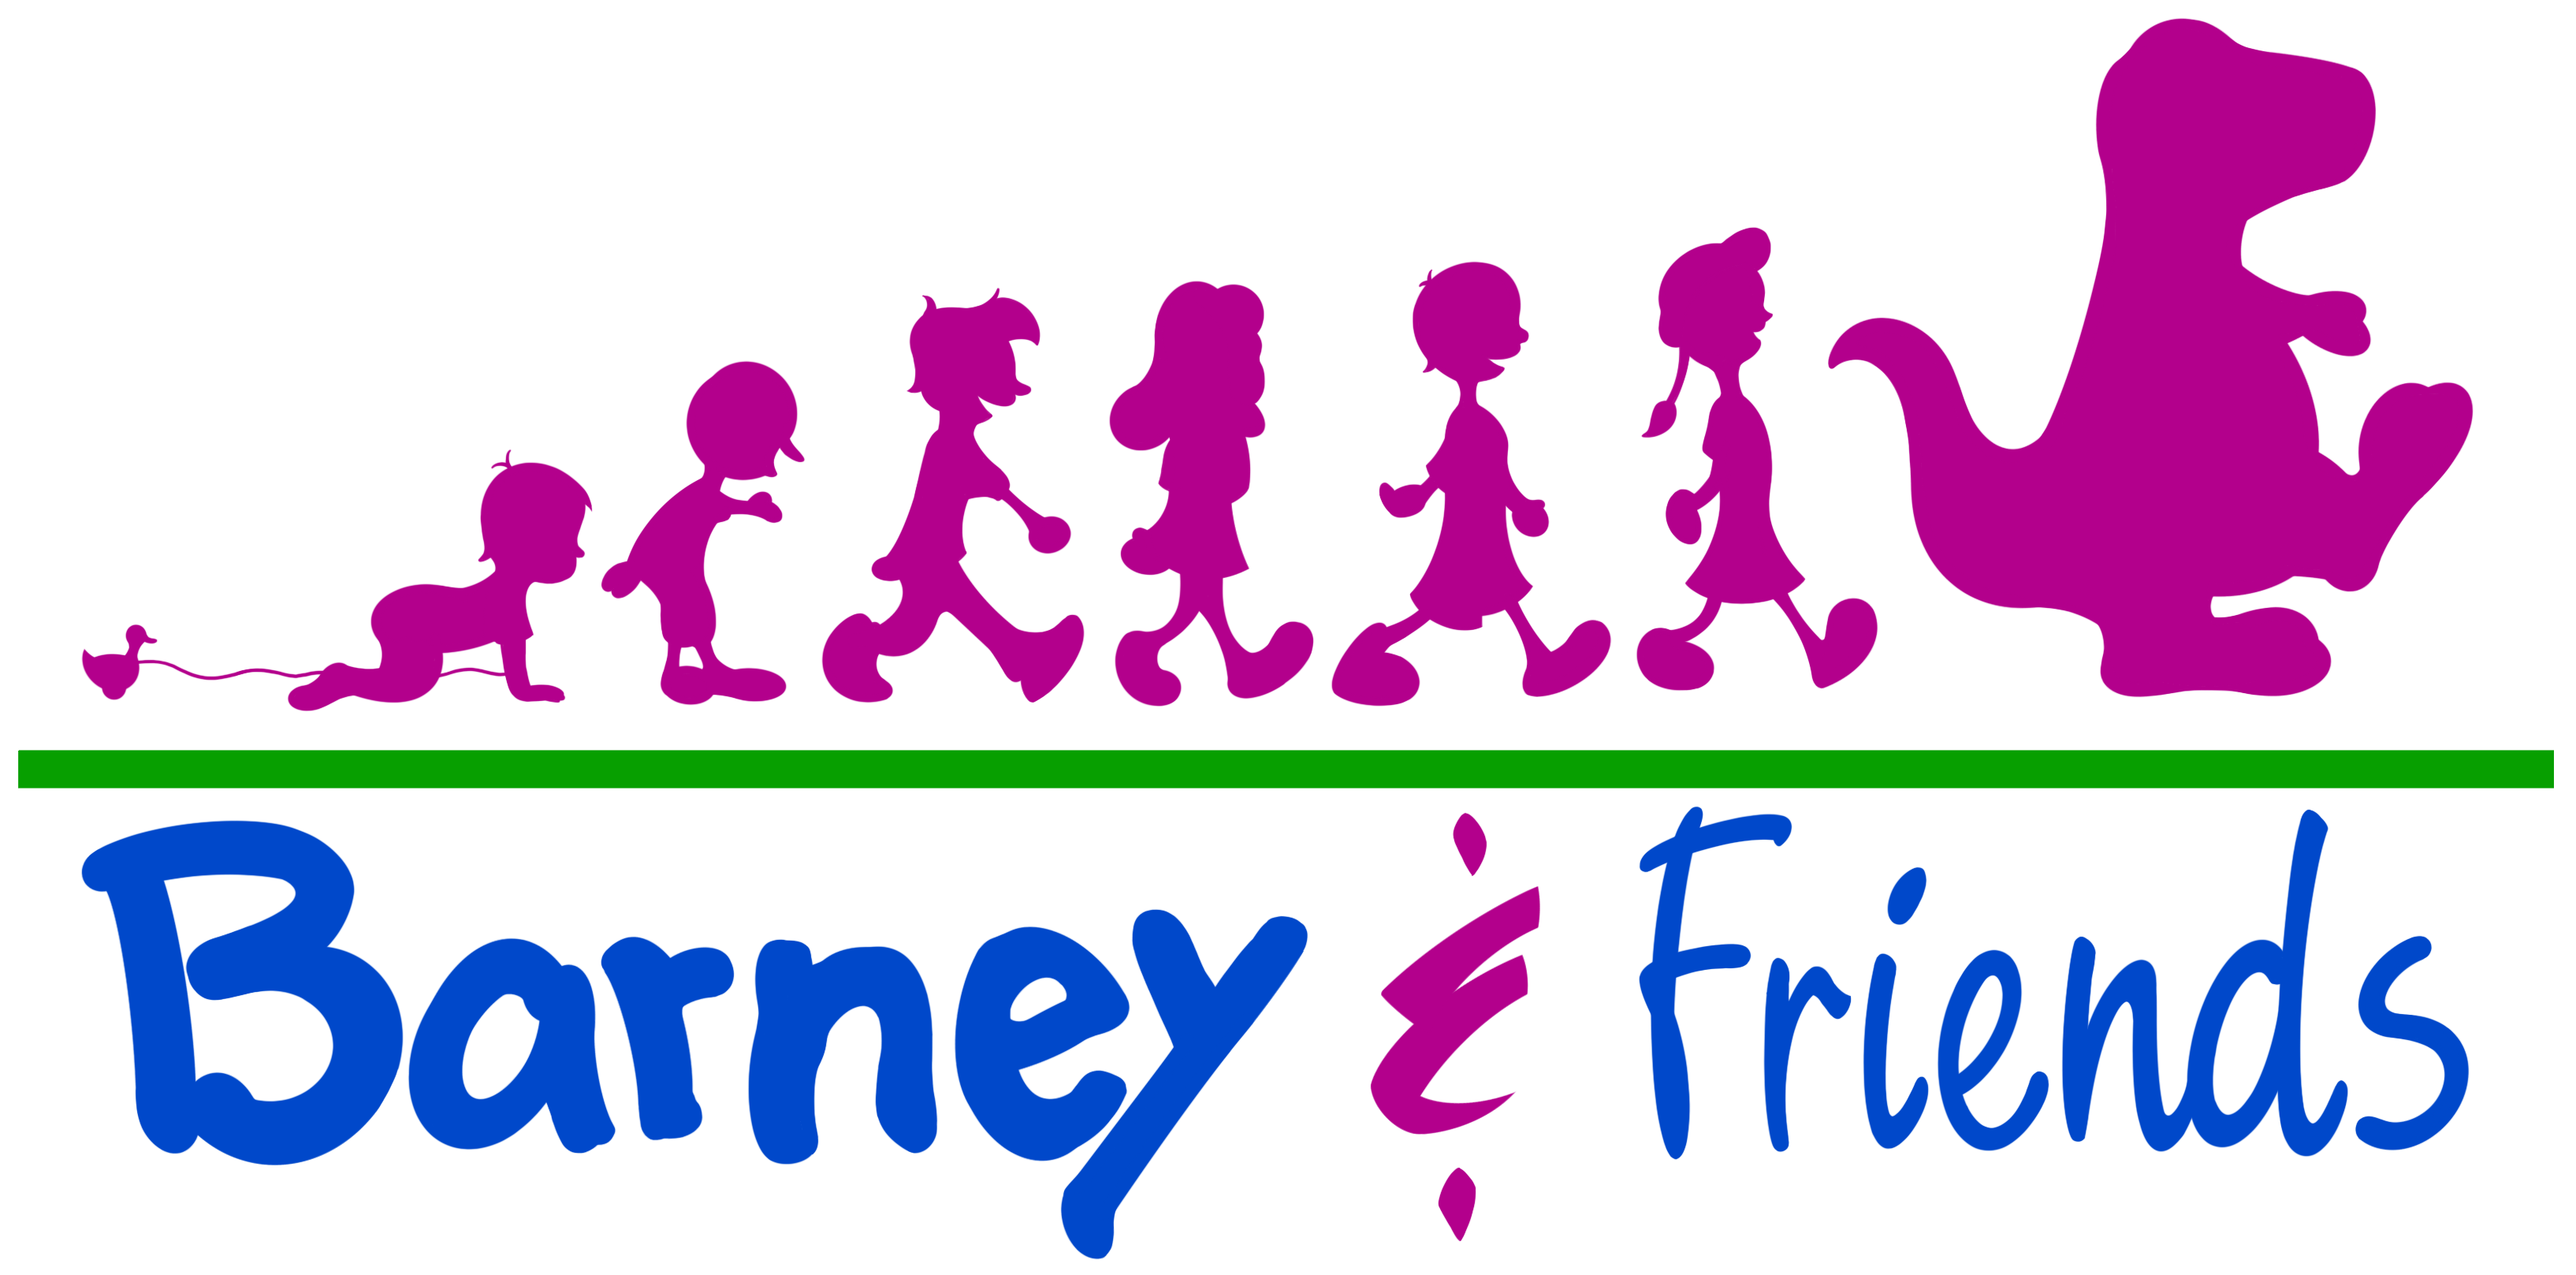 Barney And Friends Logo 1 Recreation By Carsyncunningham On Deviantart